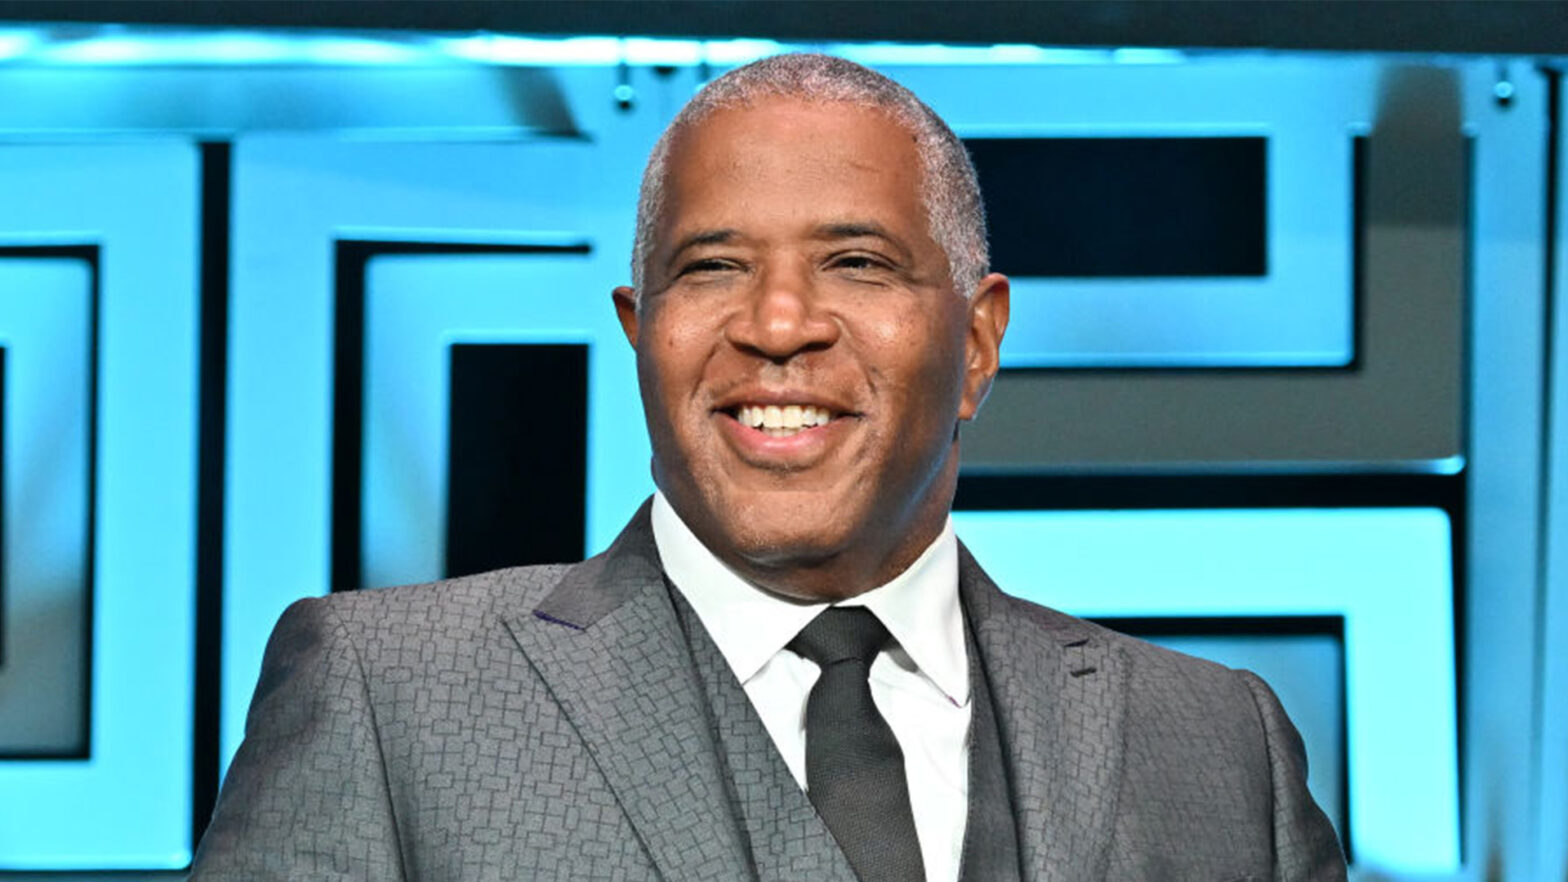 Robert F. Smith’s Vista Equity Partners Raises $20B In Its Largest Fund To Date